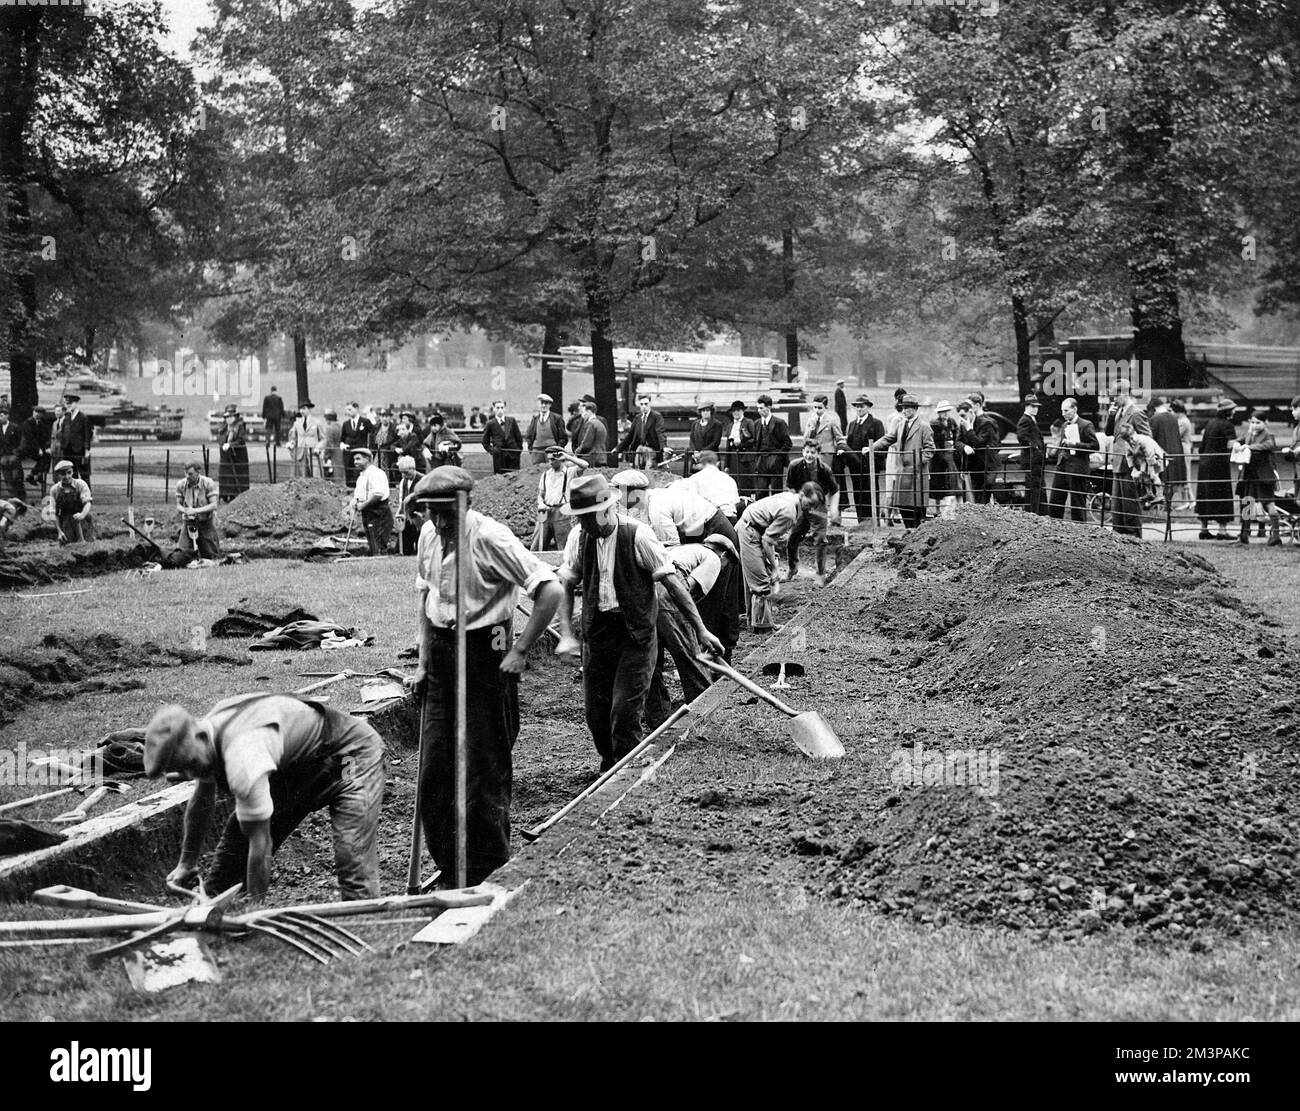 Air Raid Precautions (A.R.P.) volunteers digging trenches and shelters in Kensington Gardens, London, on 26th September 1938, watched by an interested crowd. A.R.P. volunteers were mobilised at this time, and cellars and basements were requisitioned for air raid shelters; trenches were dug in the parks of large towns.     Date: 1938 Stock Photo